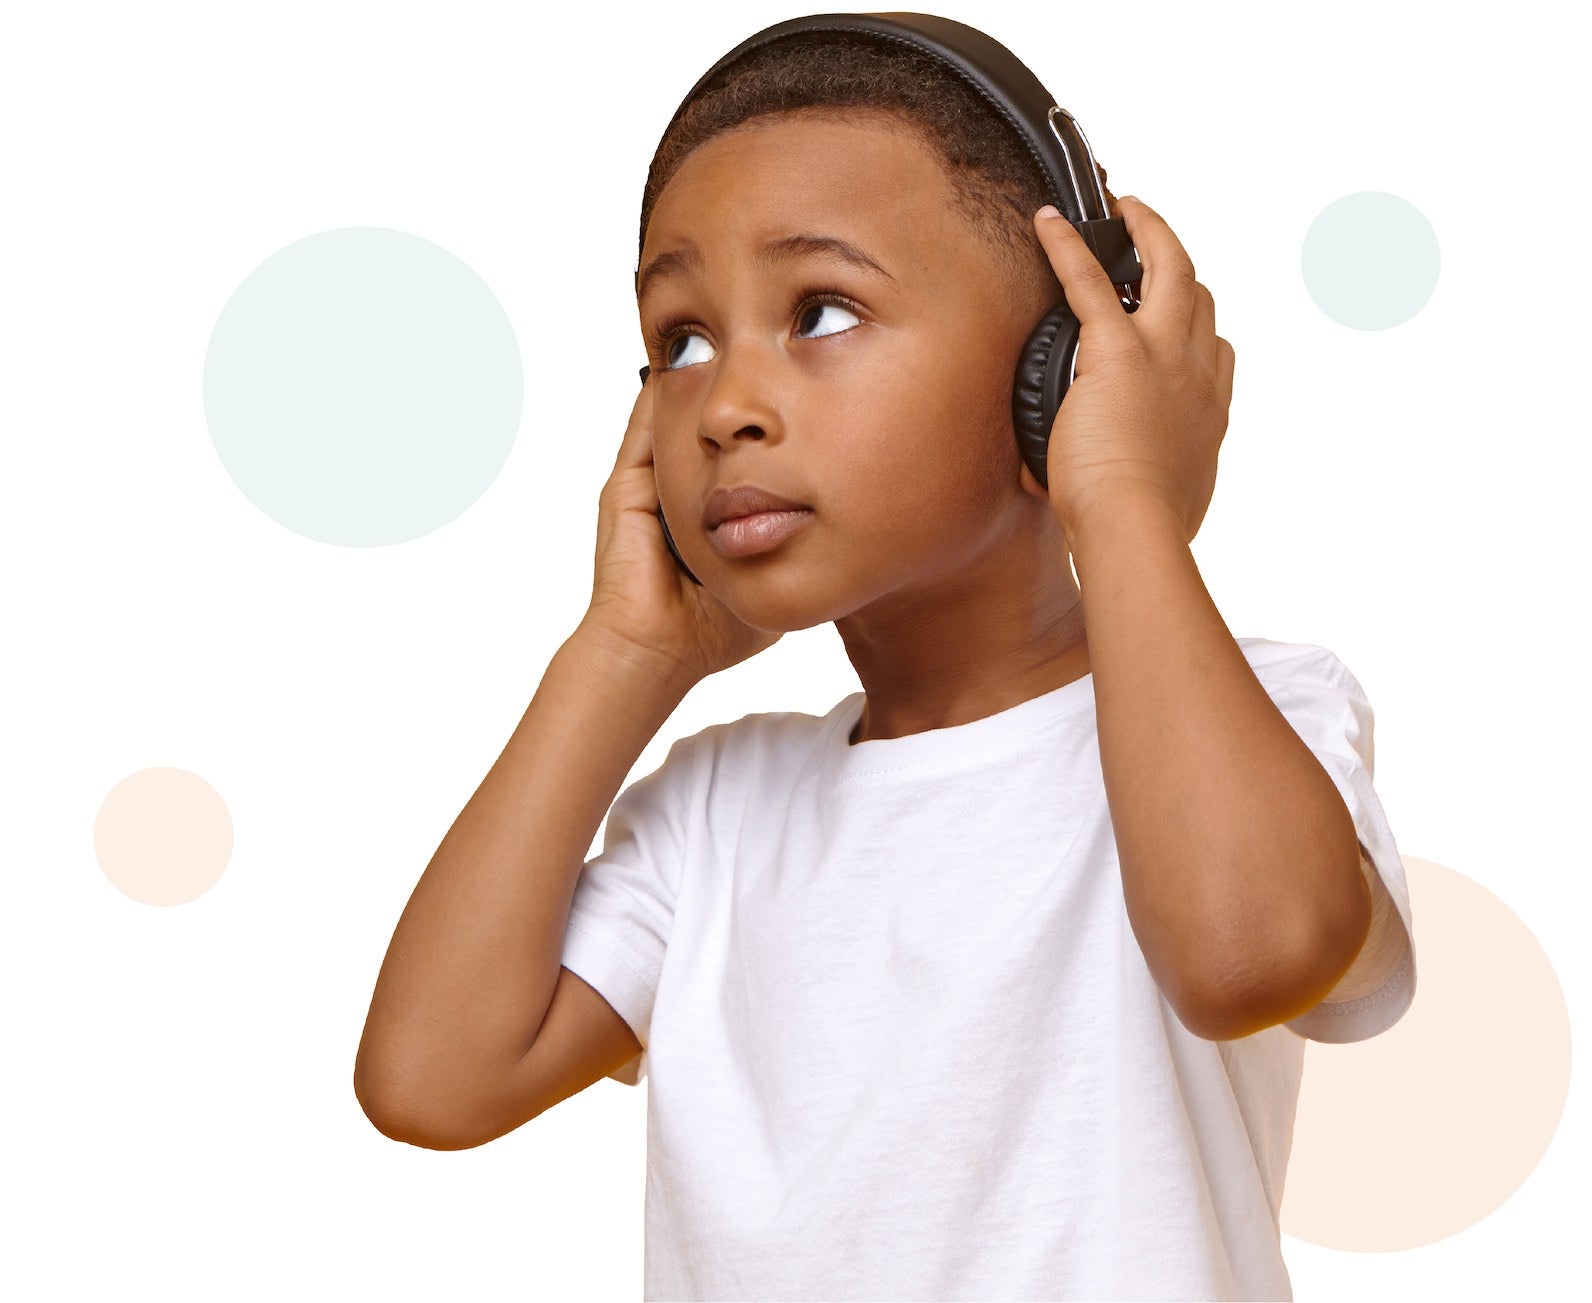 Young boy listening to headphones looking thoughtfully into the distance.